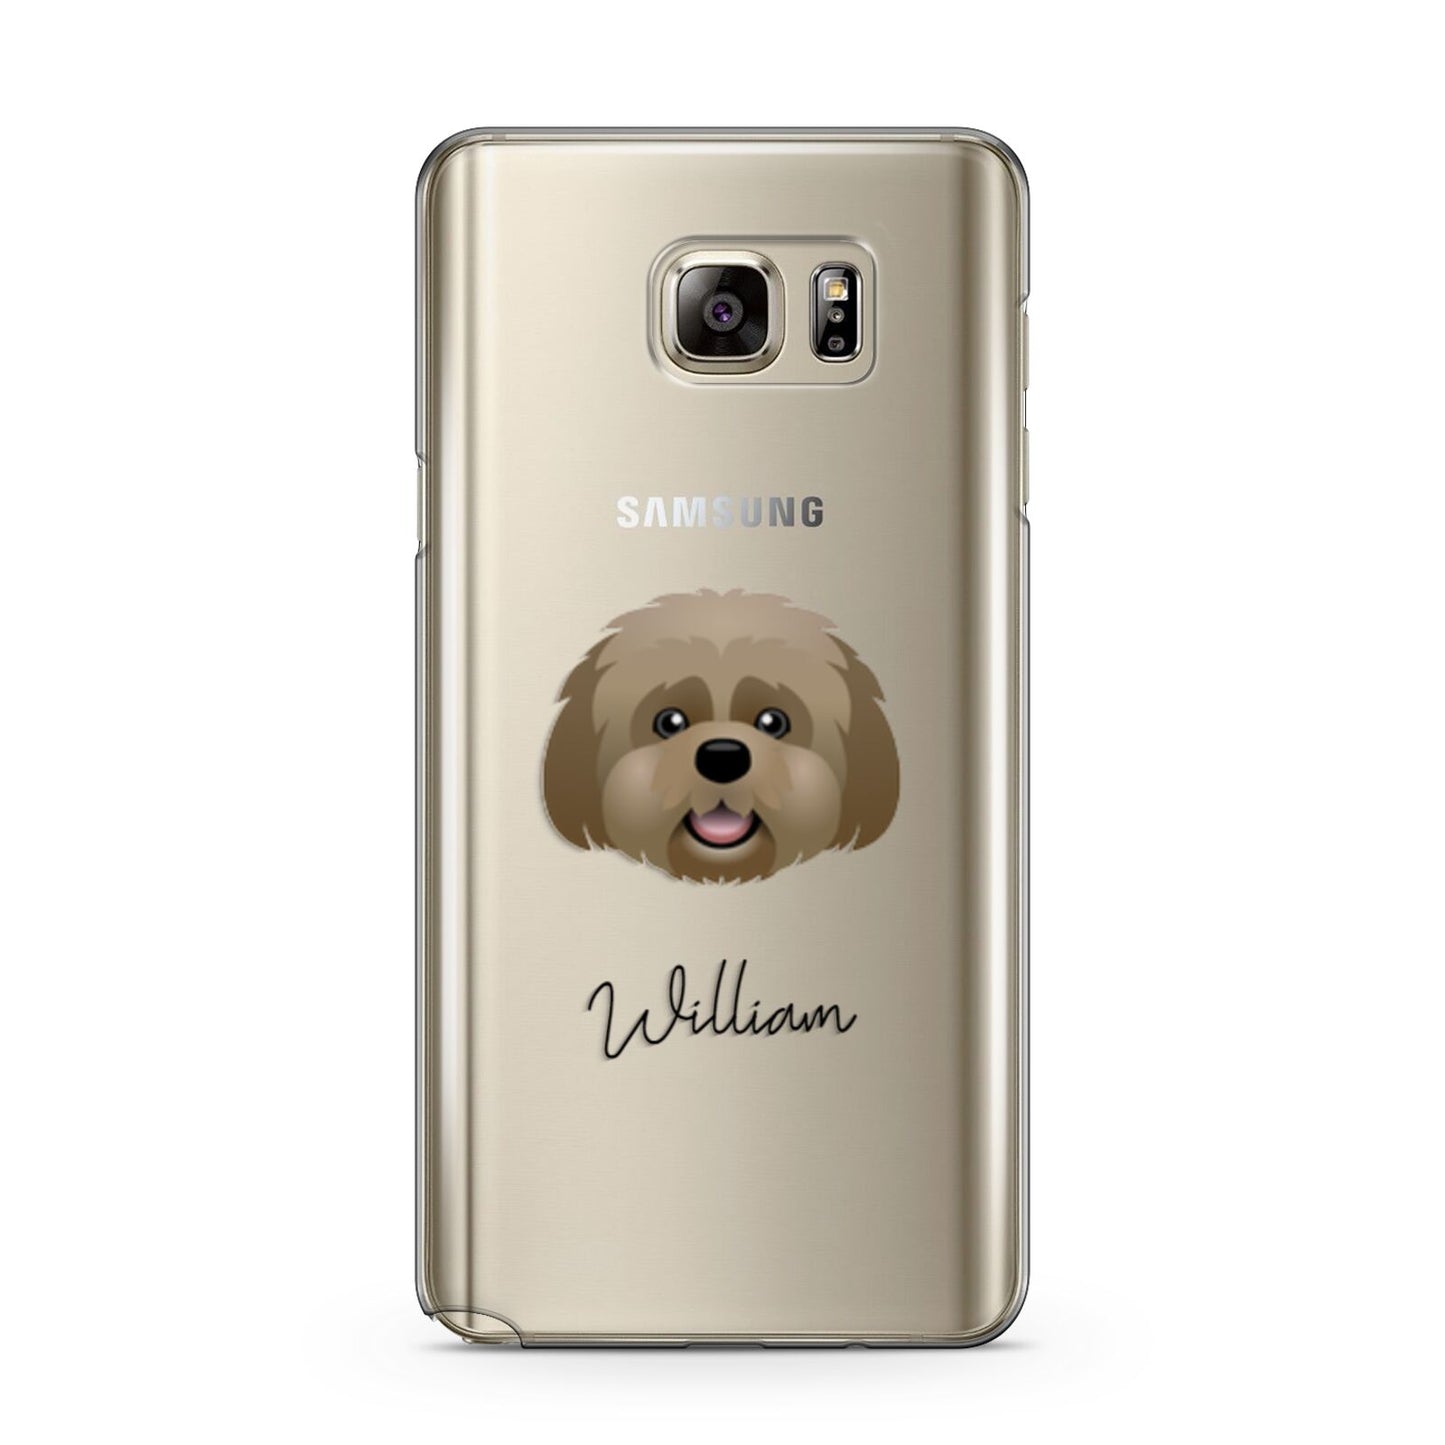 Lhatese Personalised Samsung Galaxy Note 5 Case